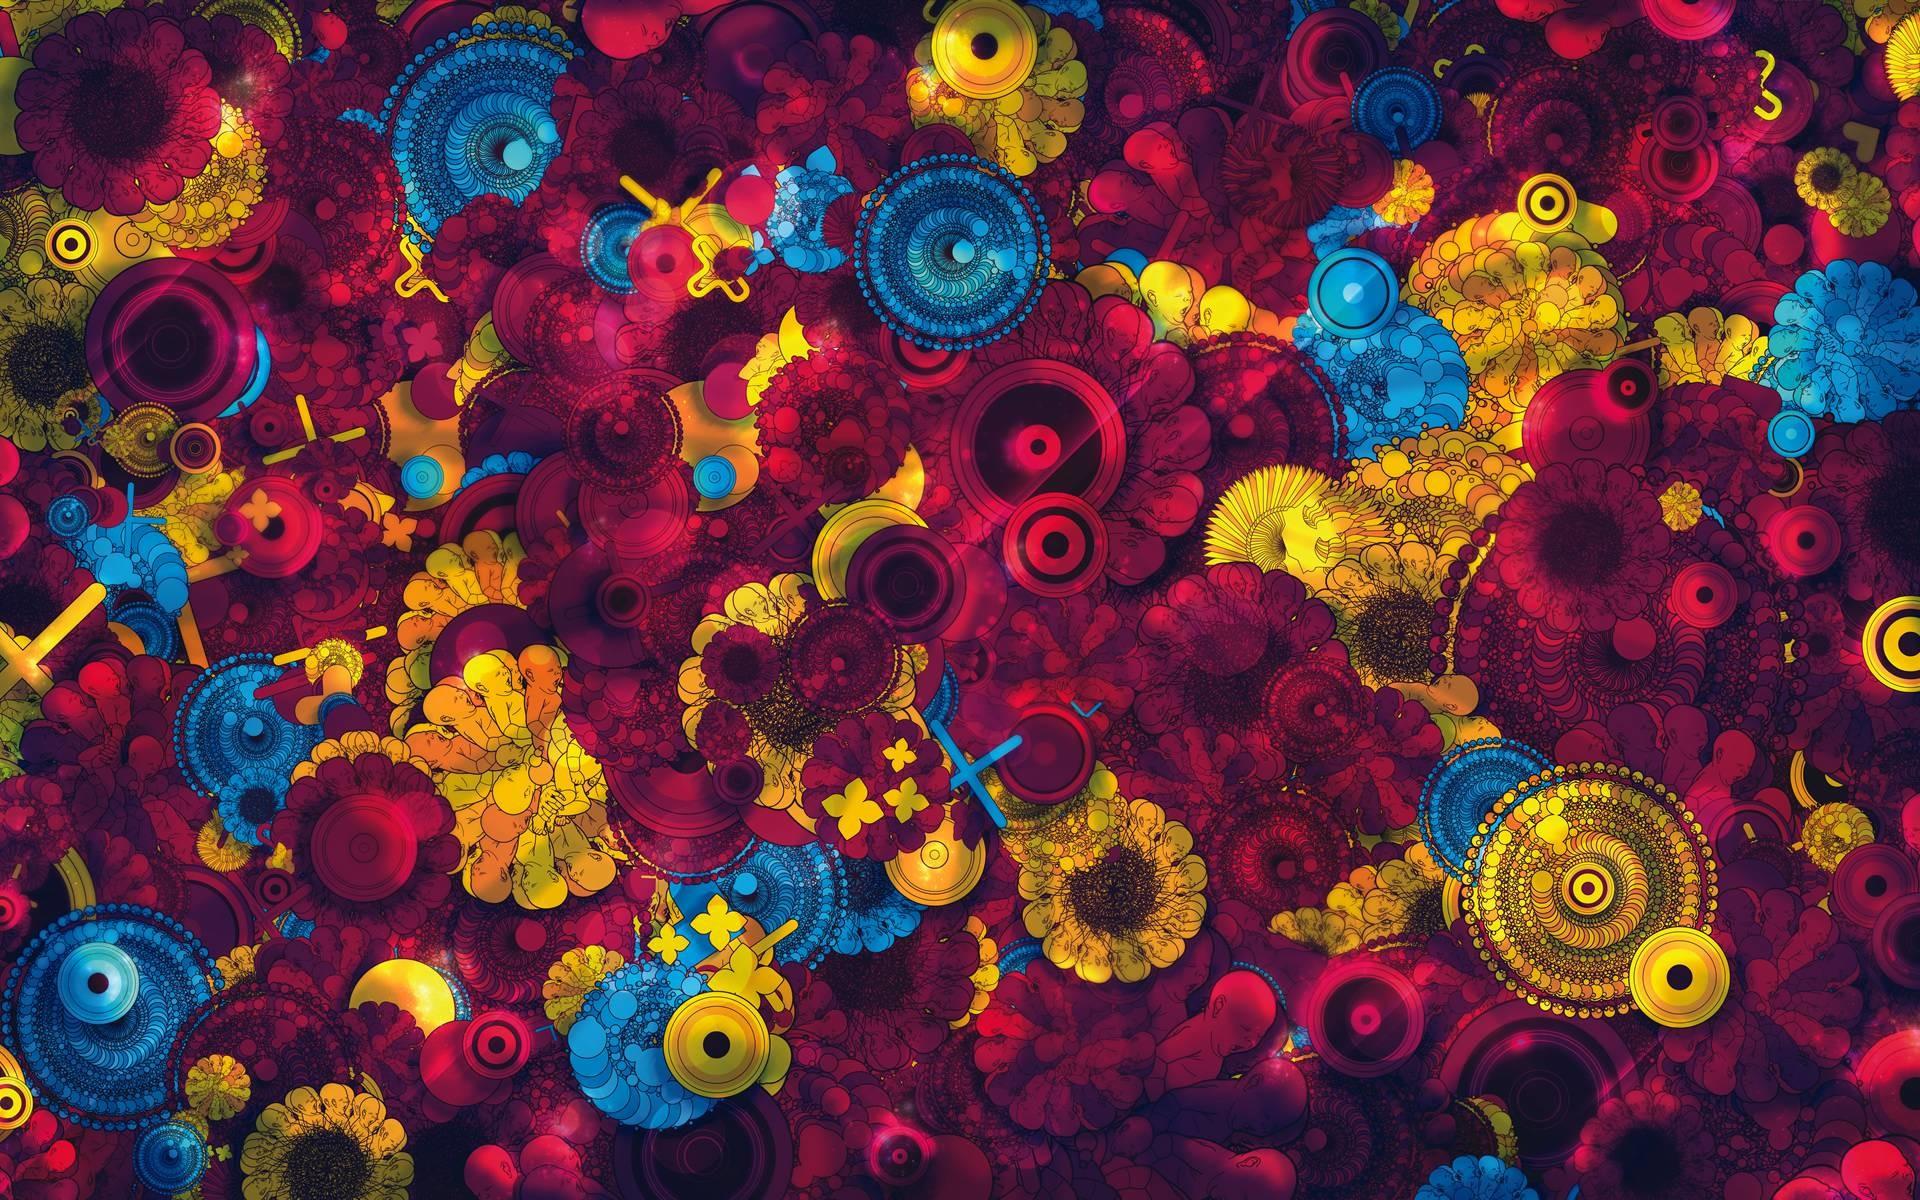 Wallpaper Psicodelico - Psychedelic Wallpapers Hd , HD Wallpaper & Backgrounds